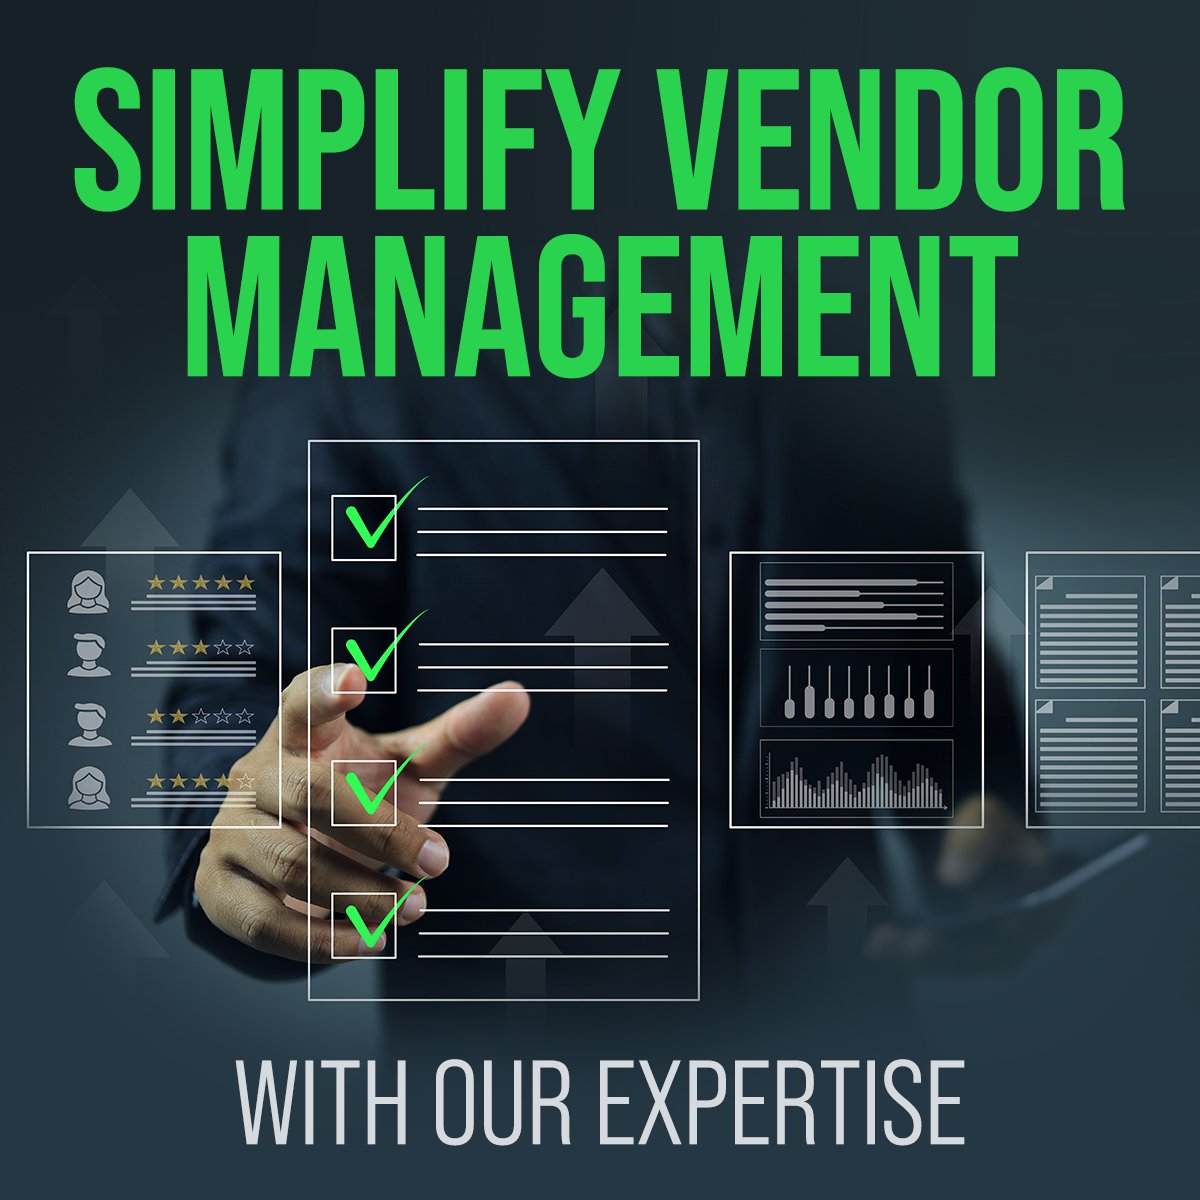 Worried about the complexities of managing IT vendors? Our MSP can handle vendor relationships and ensure seamless operations. bit.ly/4ajHon8
#kjtechnology #KJTechnology #VendorManagement #ITSupport #BusinessEfficiency